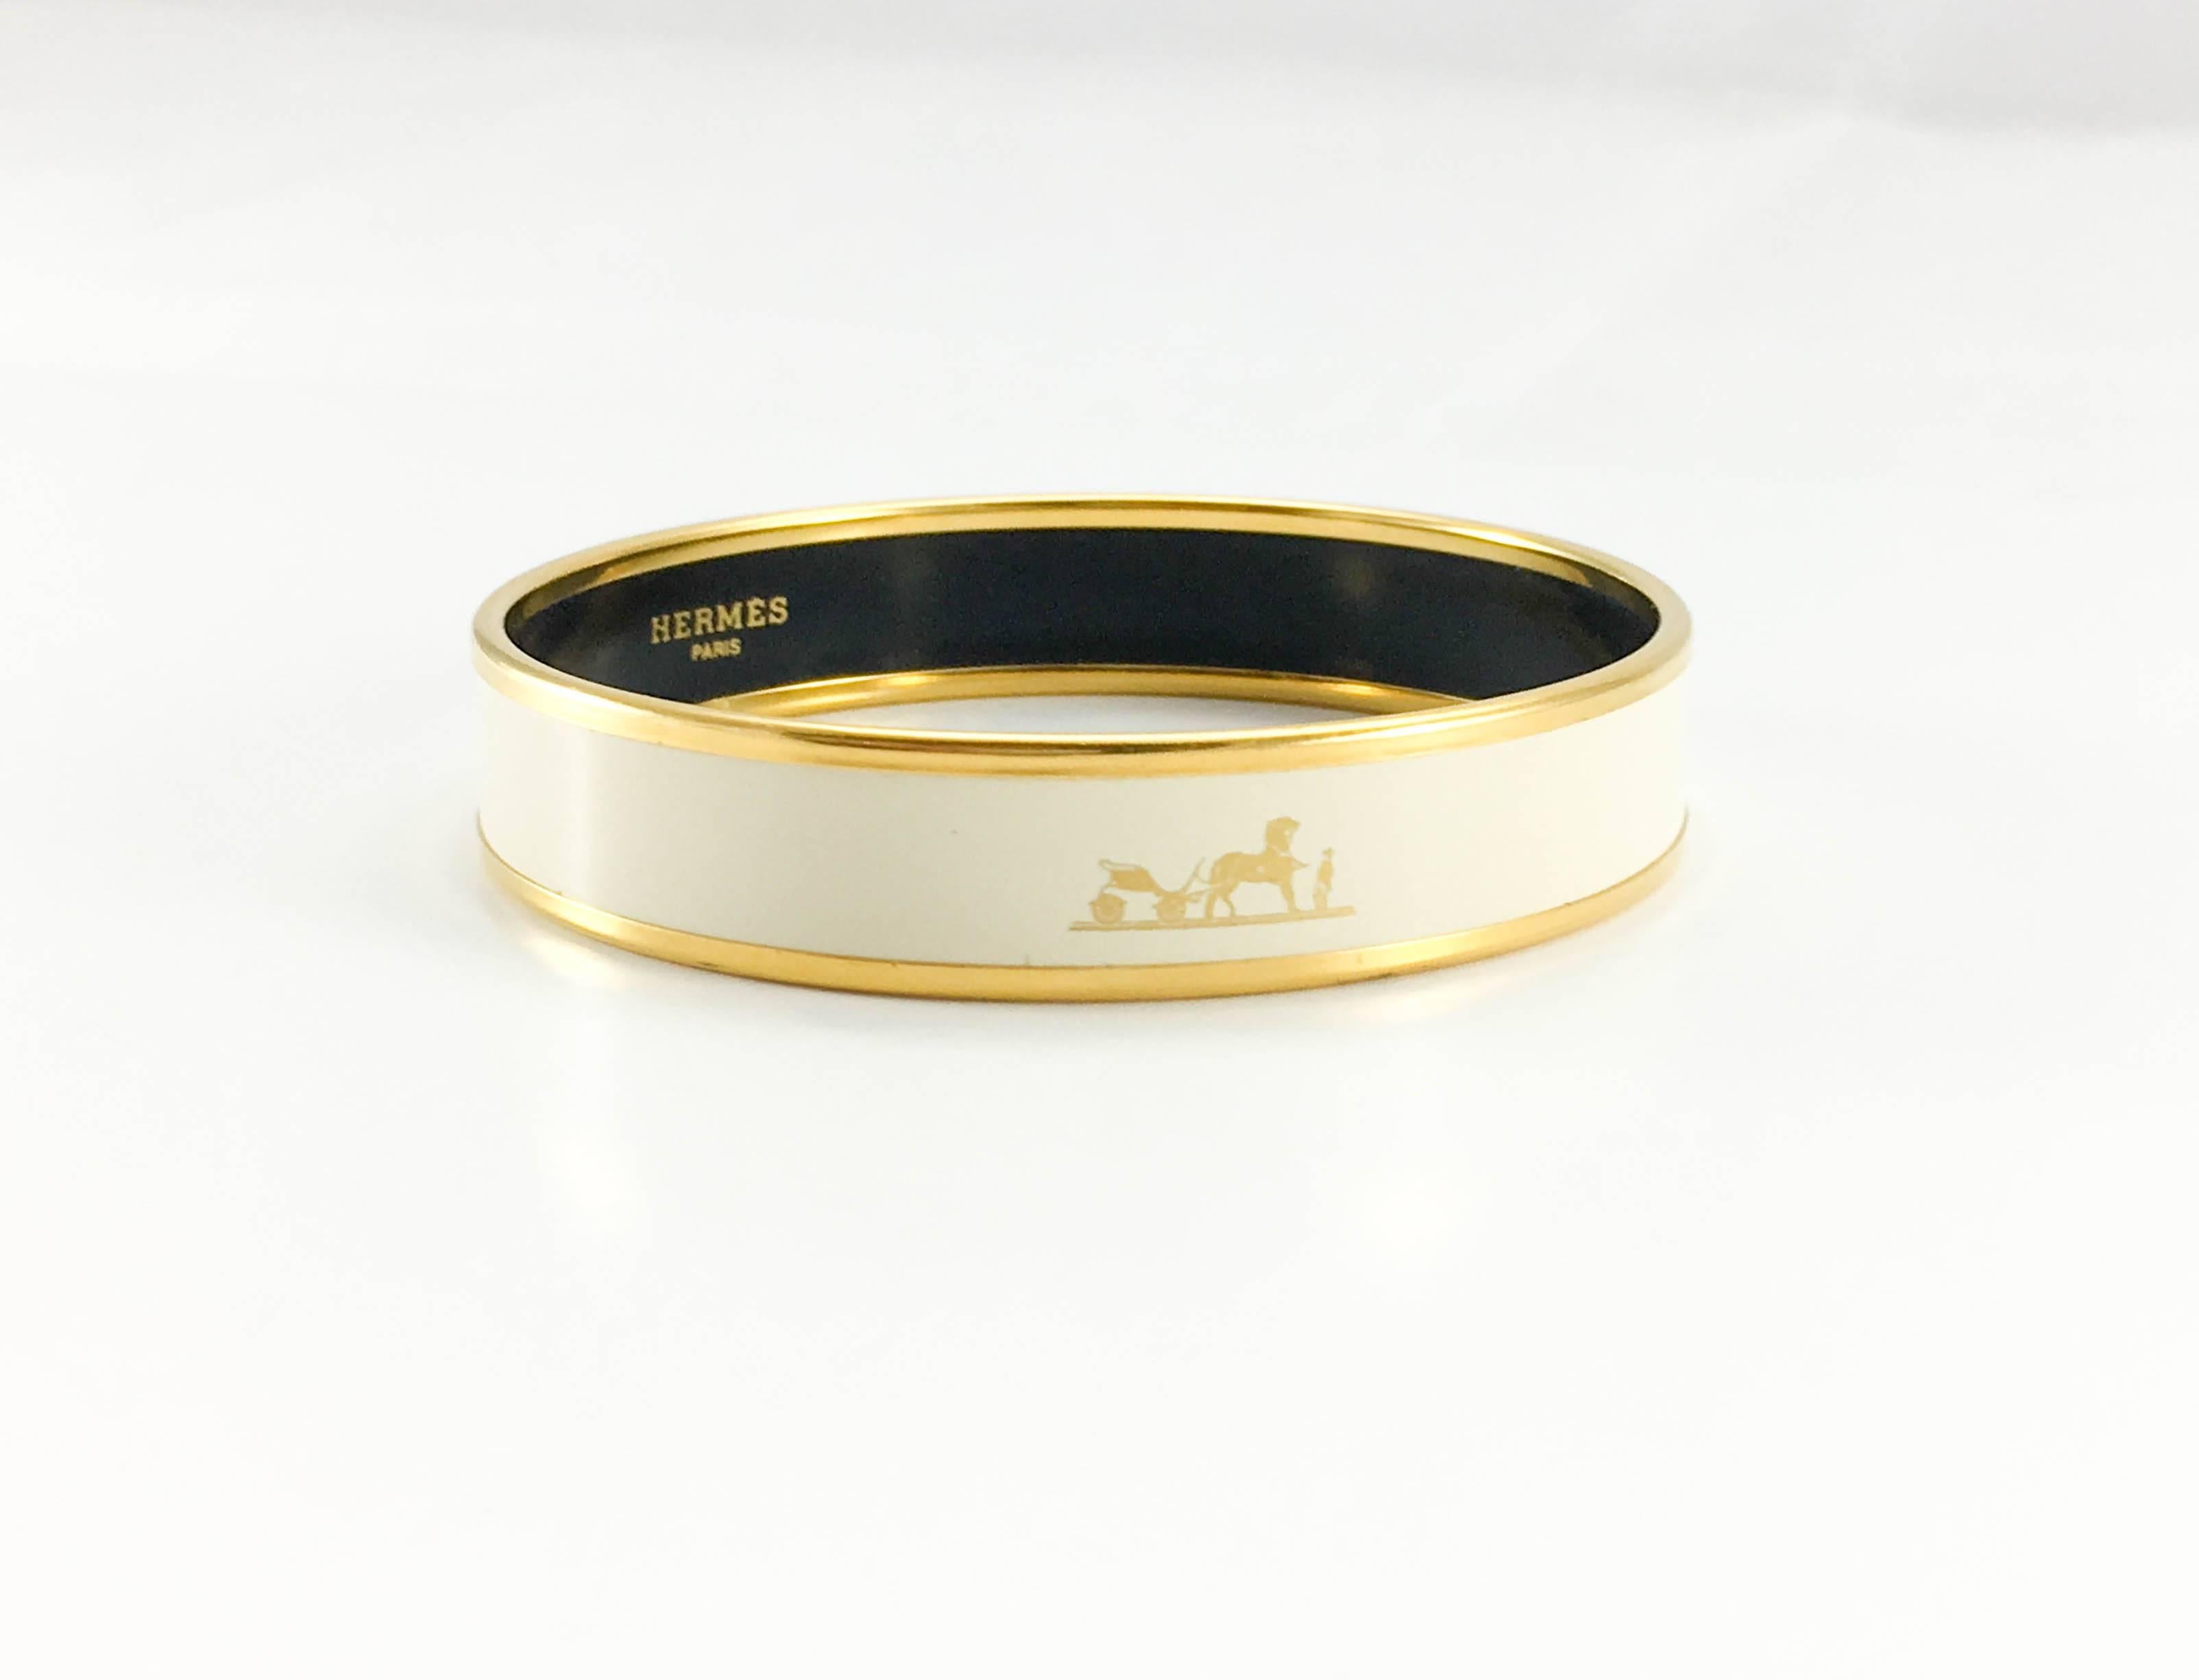 Hermes White Kelly Caleche Gold Enamel Bangle. This beautiful bangle by Hermes is made in white and gold enamel. It features 3 images of the iconic Hermes horse and carriage design, making this now discontinued design by Hermes very sought after. A